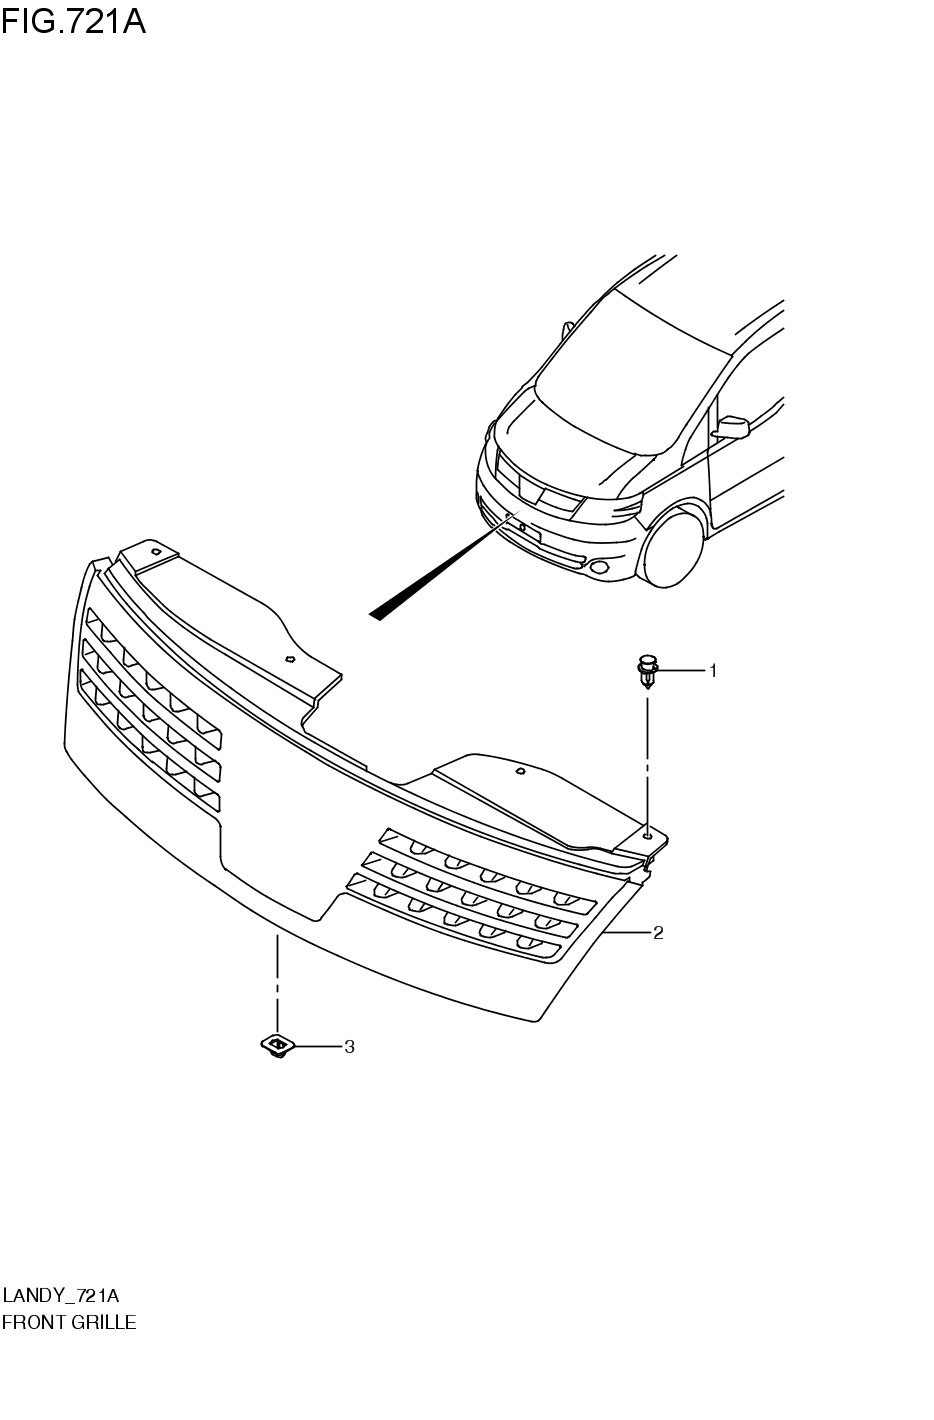 FRONT GRILLE/ GRILL GUARD